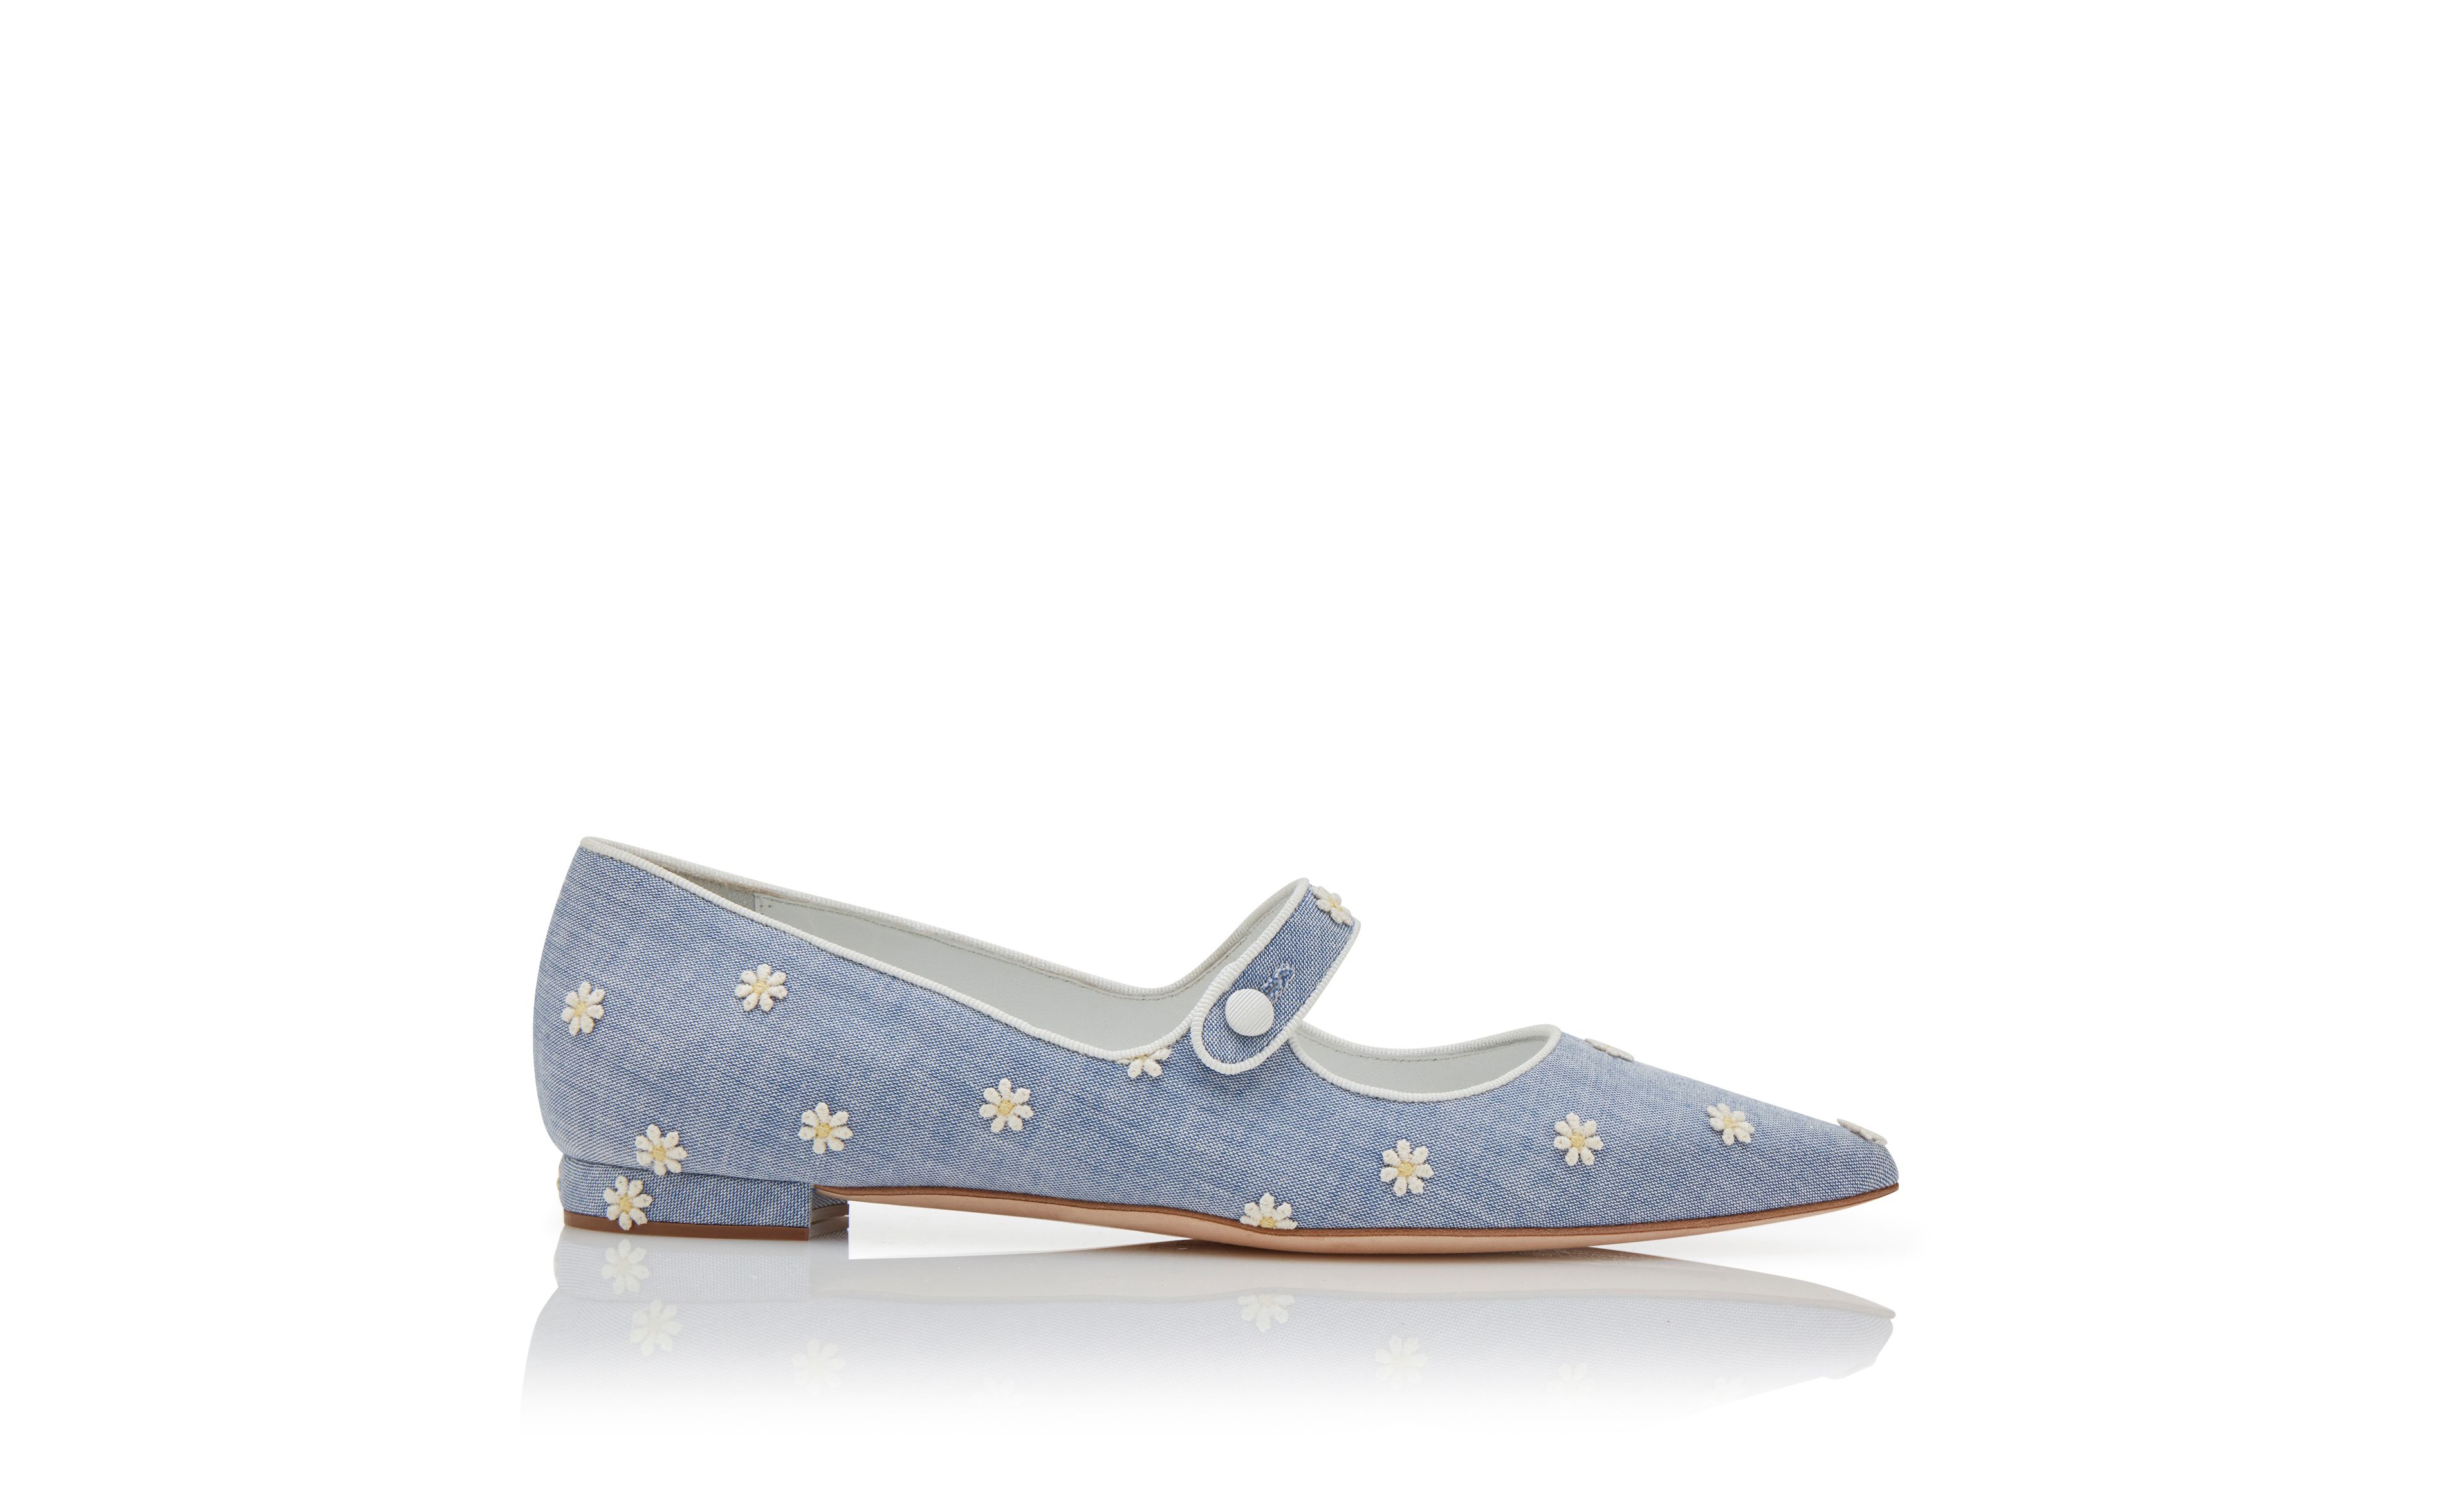 Designer Blue and White Chambray Daisy Flat Pumps - Image Side View